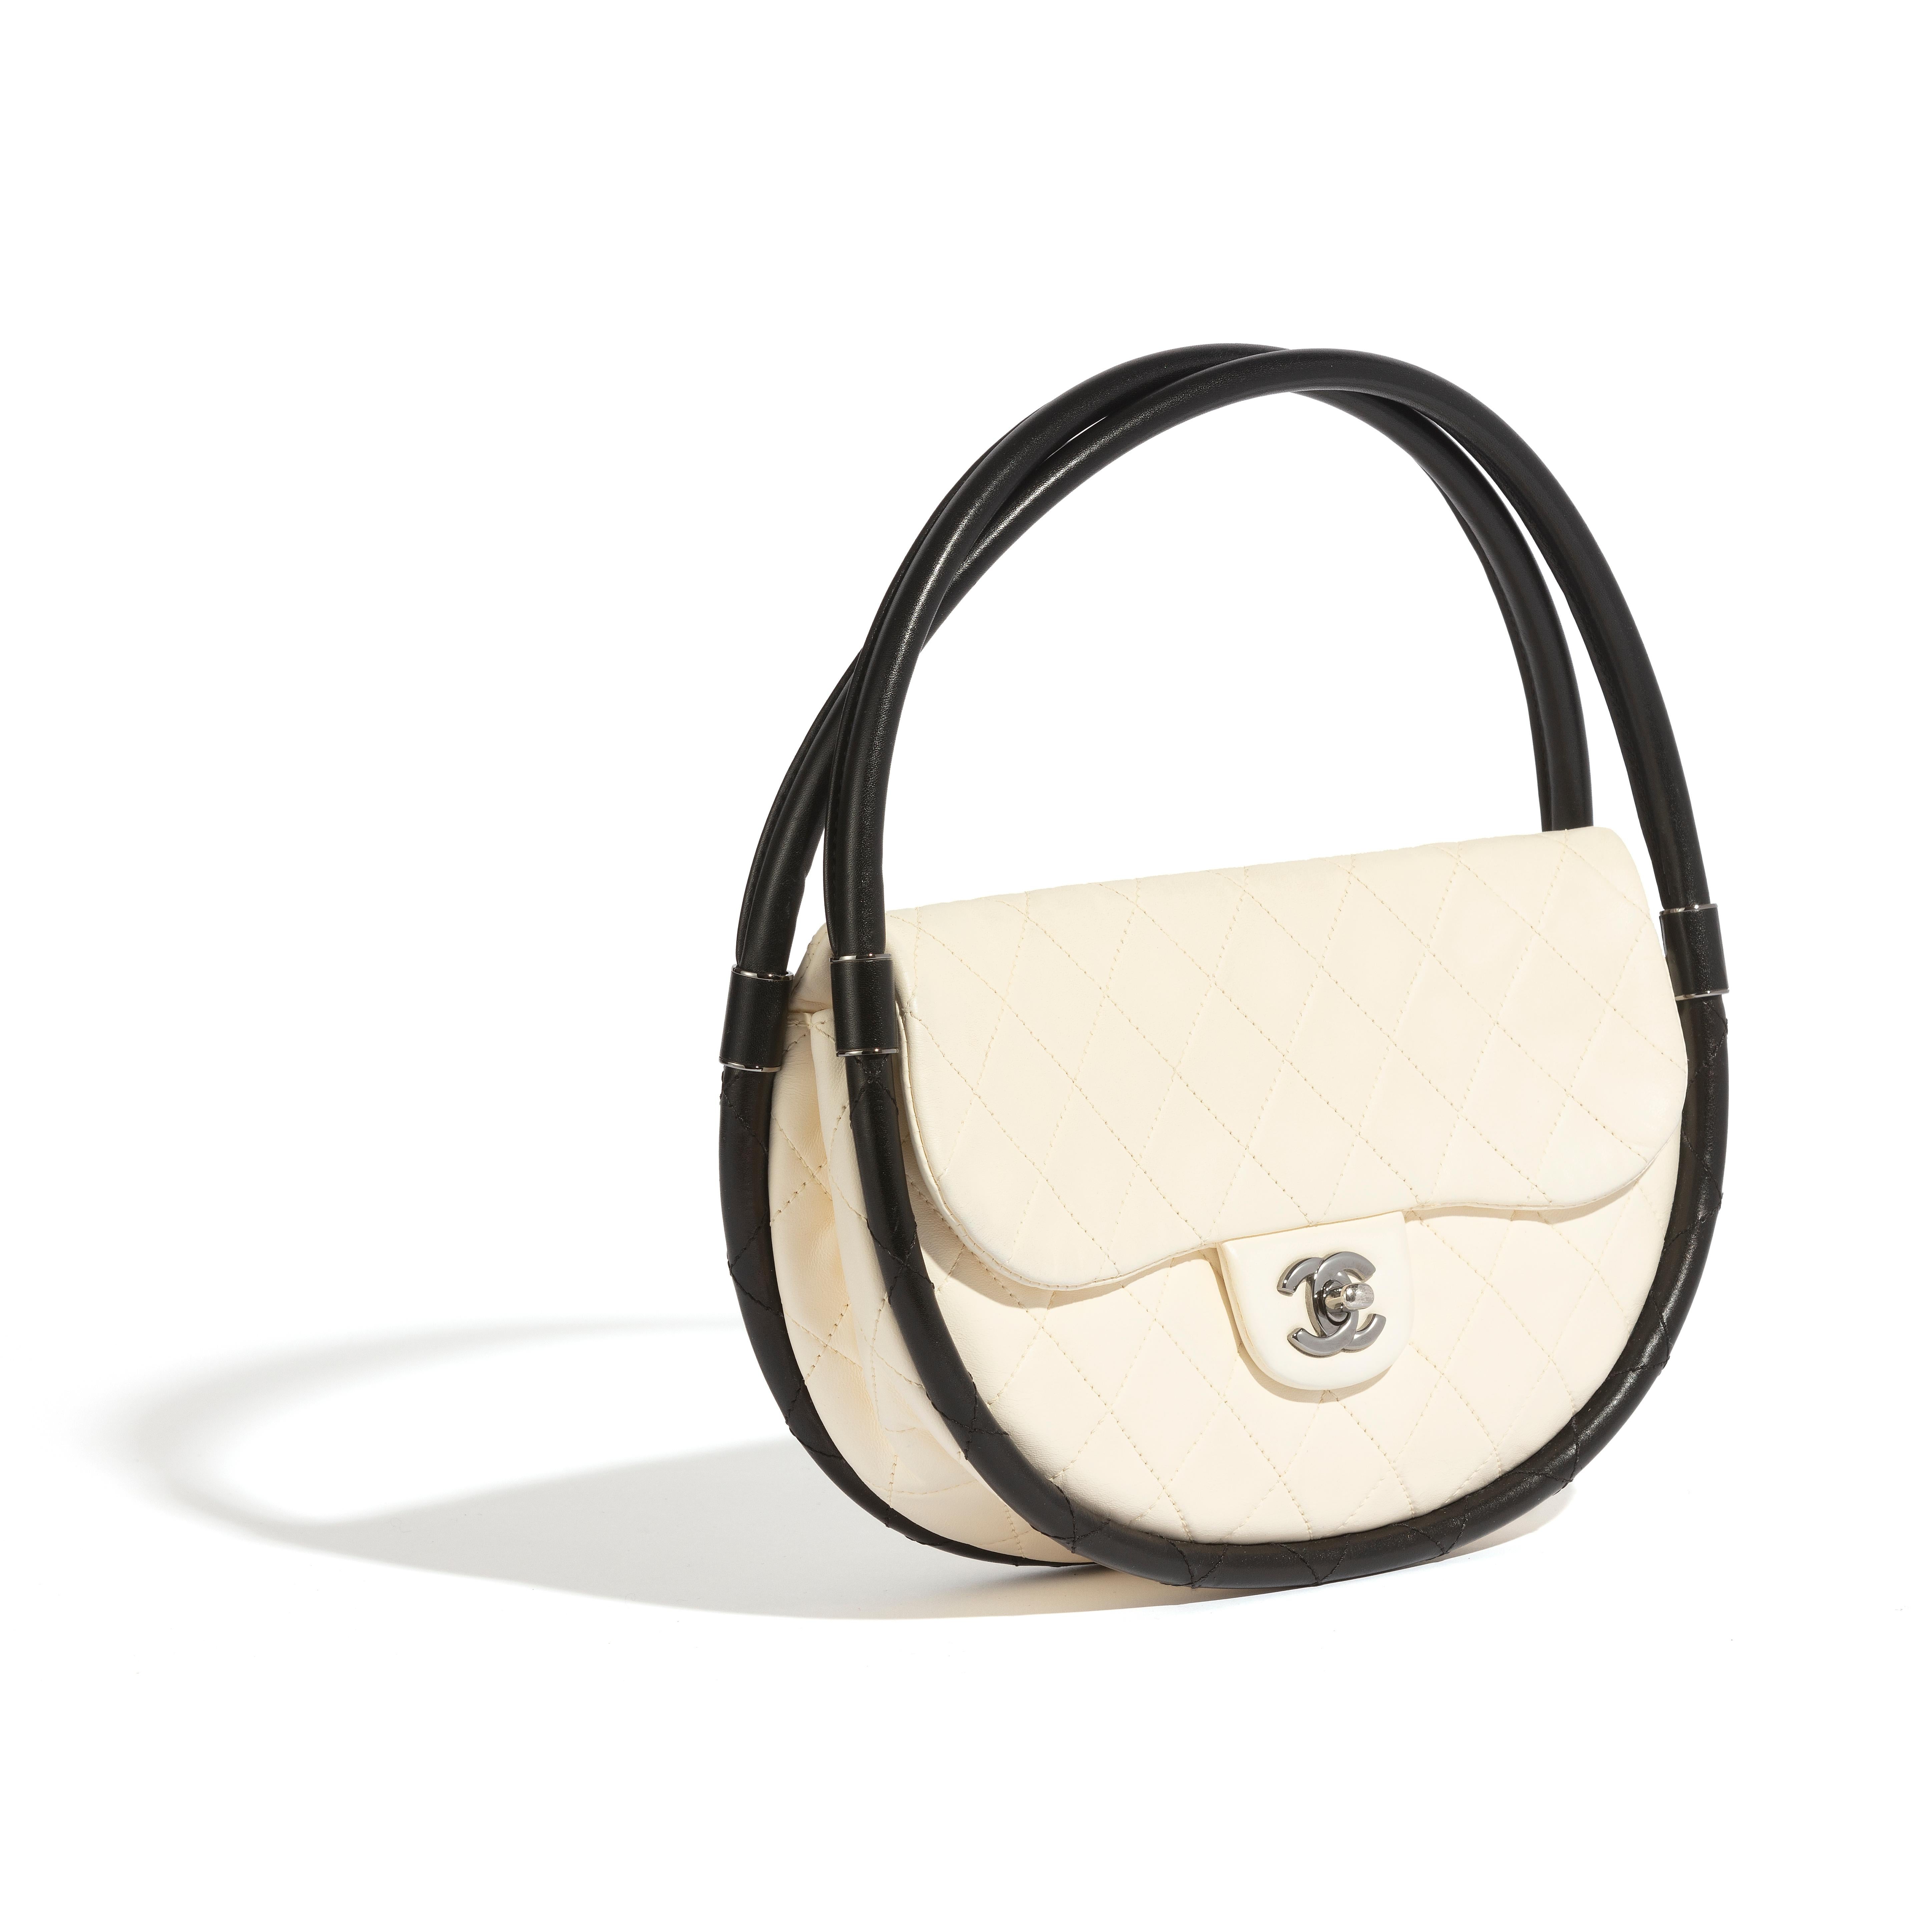 This iconic piece first hit the runway during the Spring/Summer 2013 show and has since become a viral fashion moment. The Hula Hoop bag is the perfect embodiment of Chanel's unique skill to mix classic house codes with exciting and contemporary